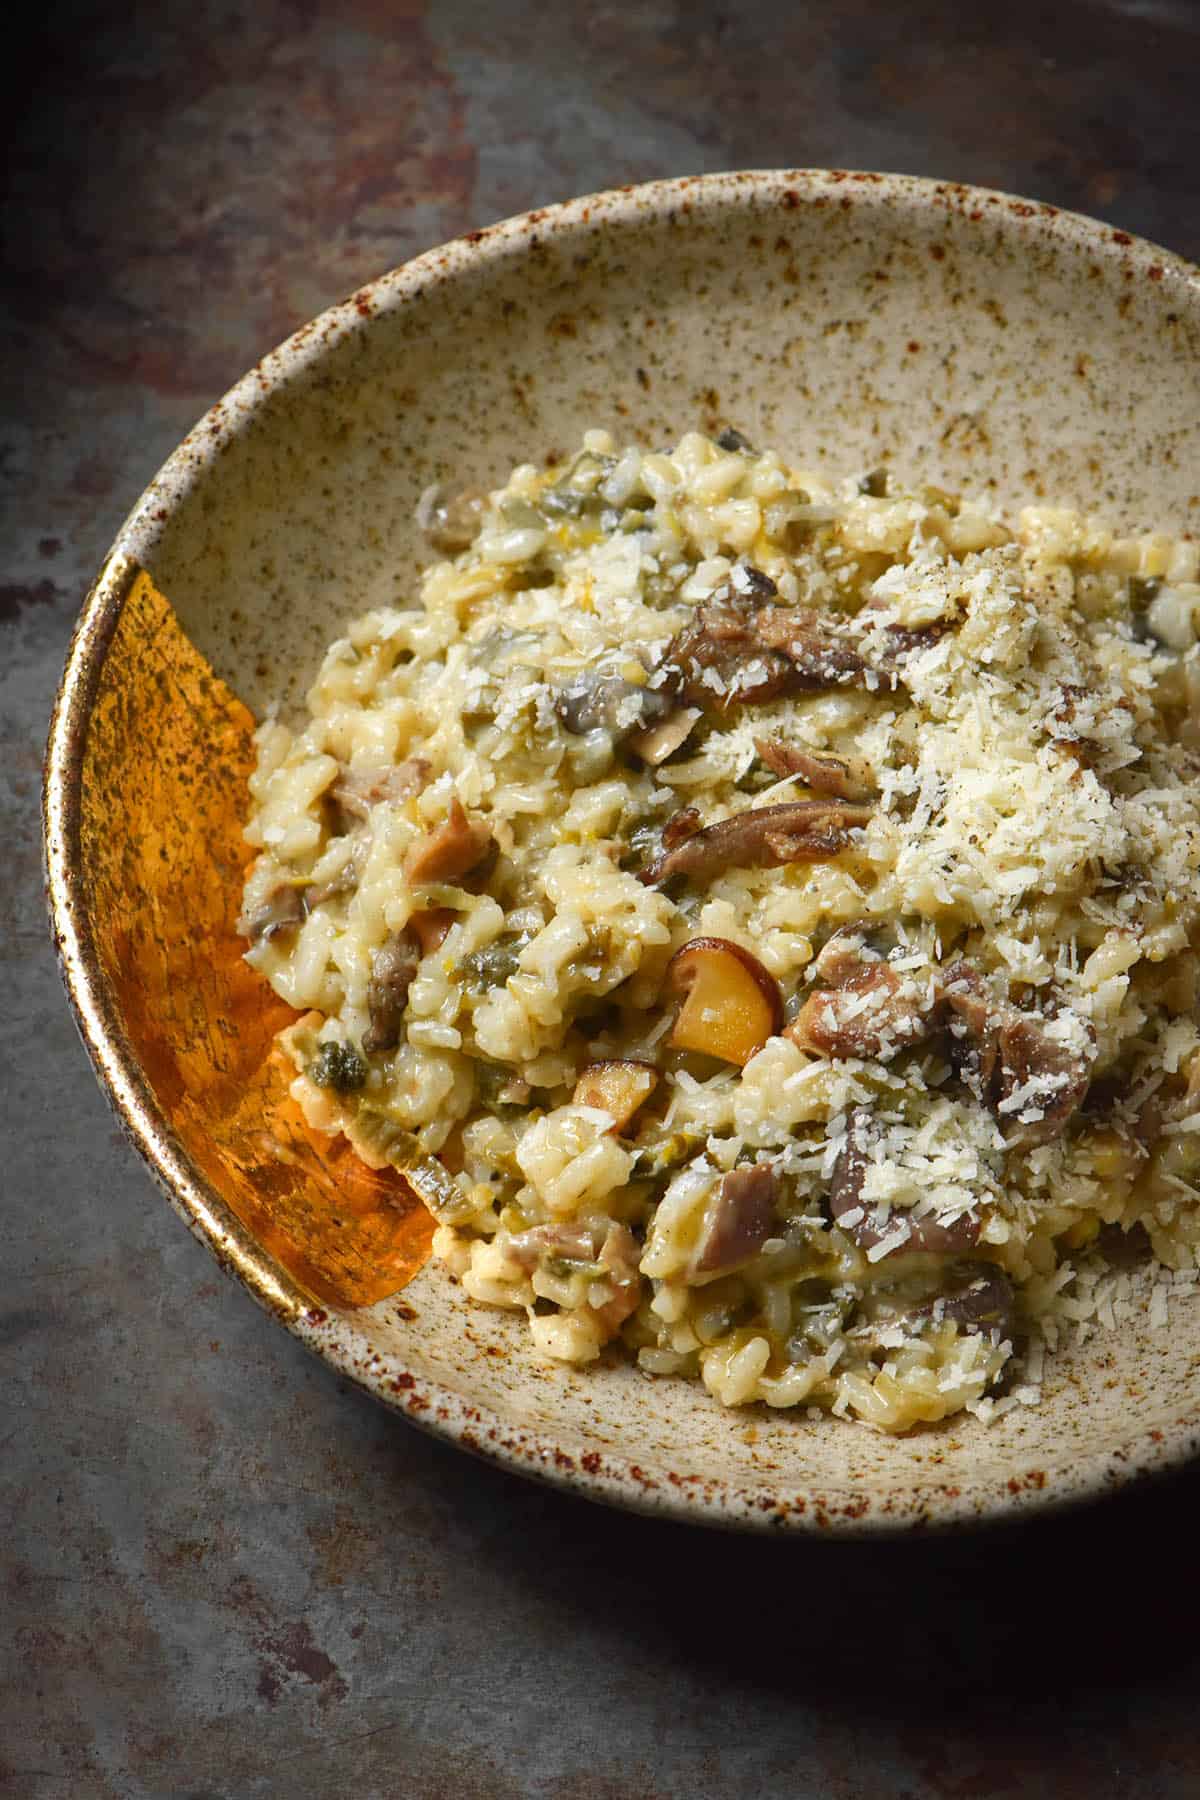 A close up side on view of a beige speckled ceramic bowl filled with low FODMAP mushroom risotto. The risotto is topped with grated parmesan and sits on a dark grey backdrop.